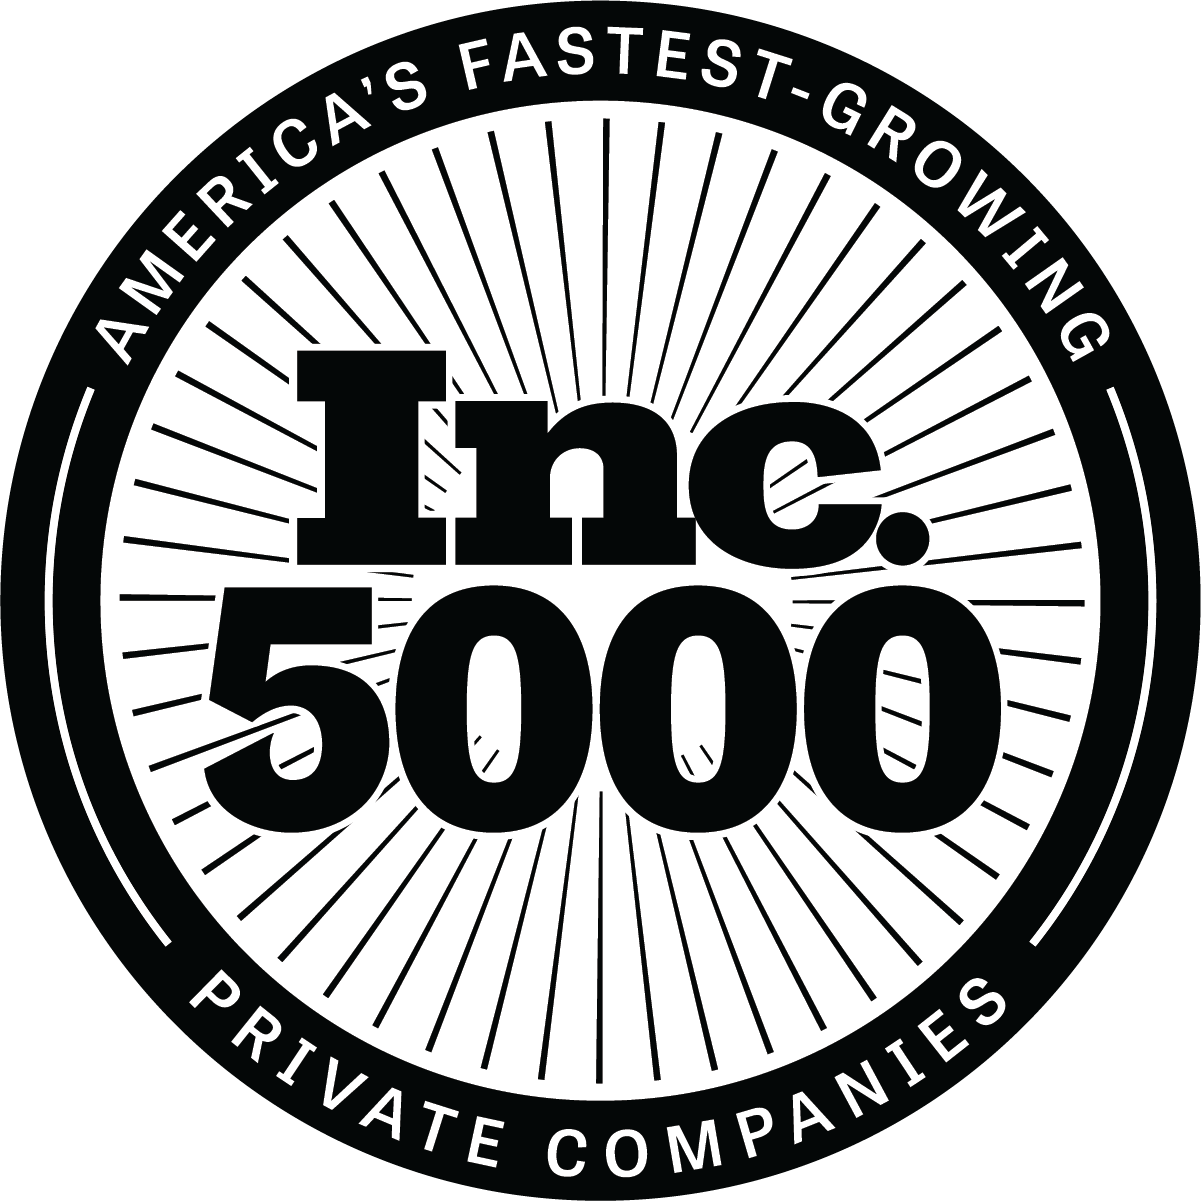 Fastest Growing Companies - 2020